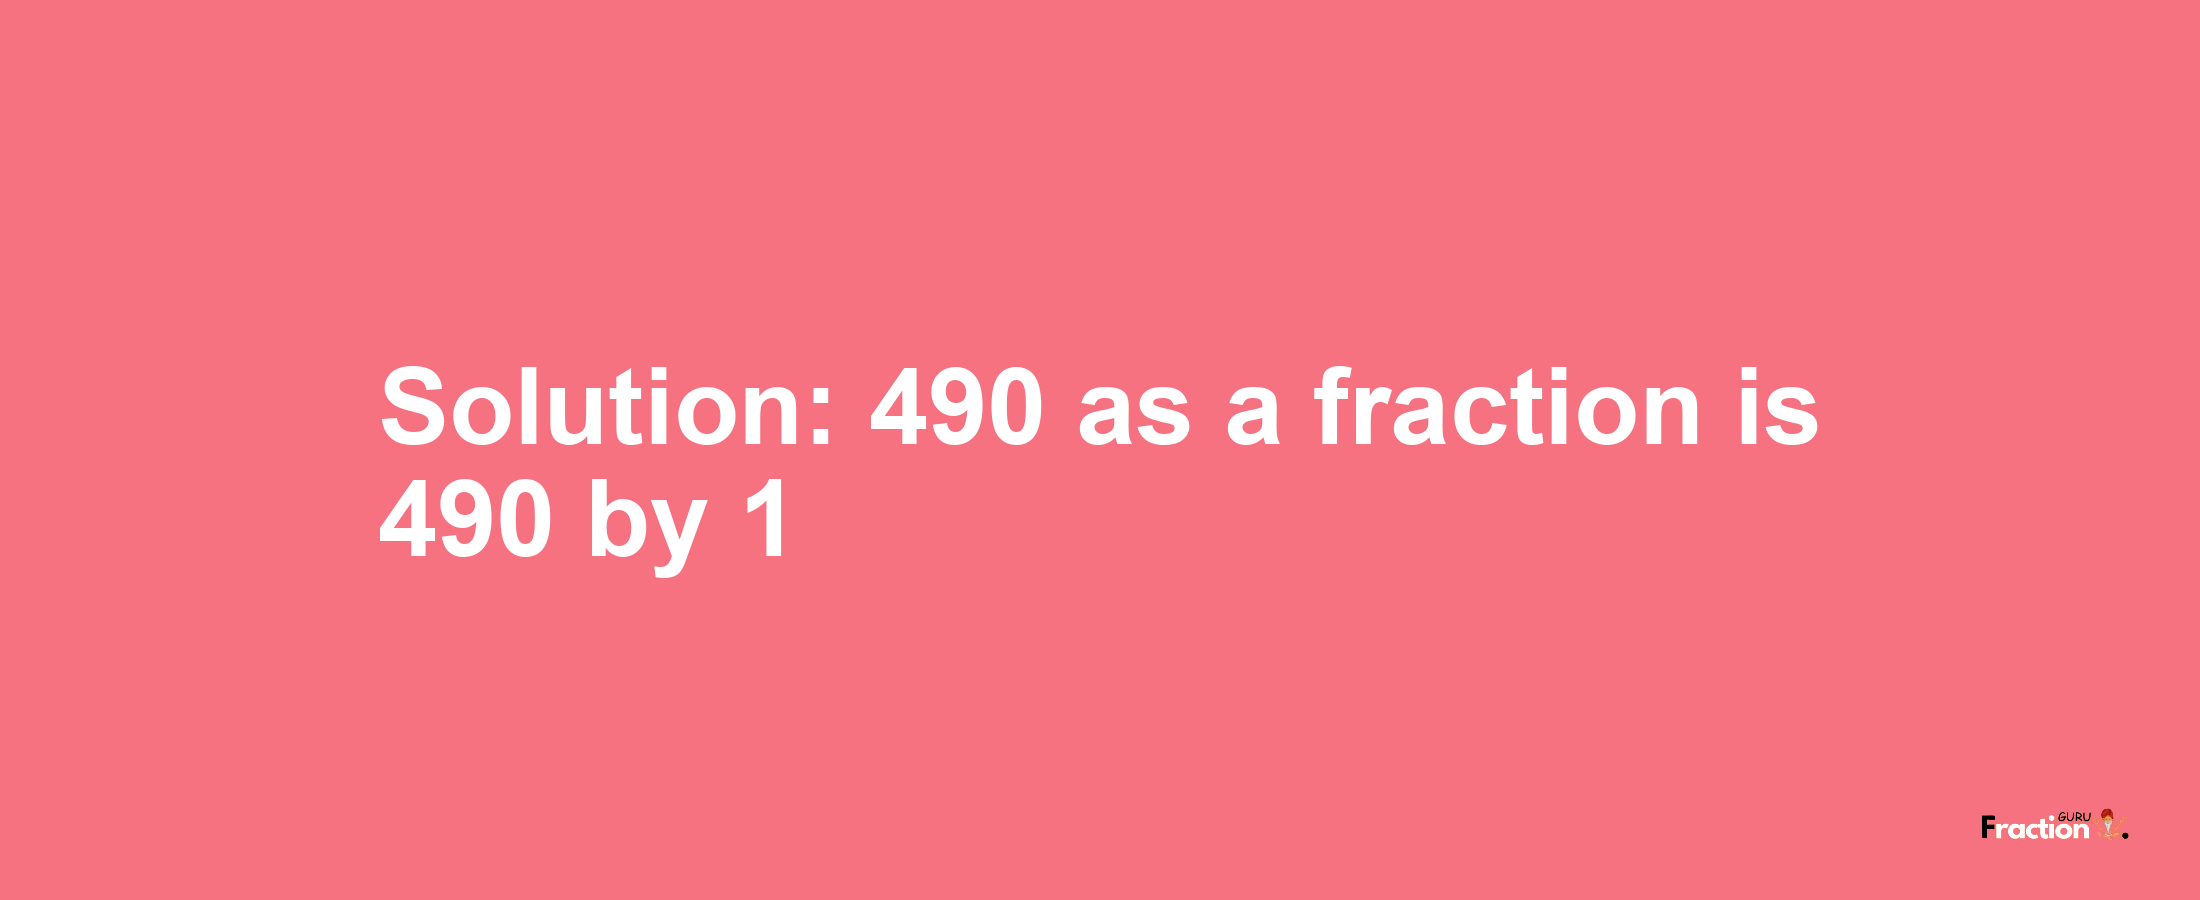 Solution:490 as a fraction is 490/1